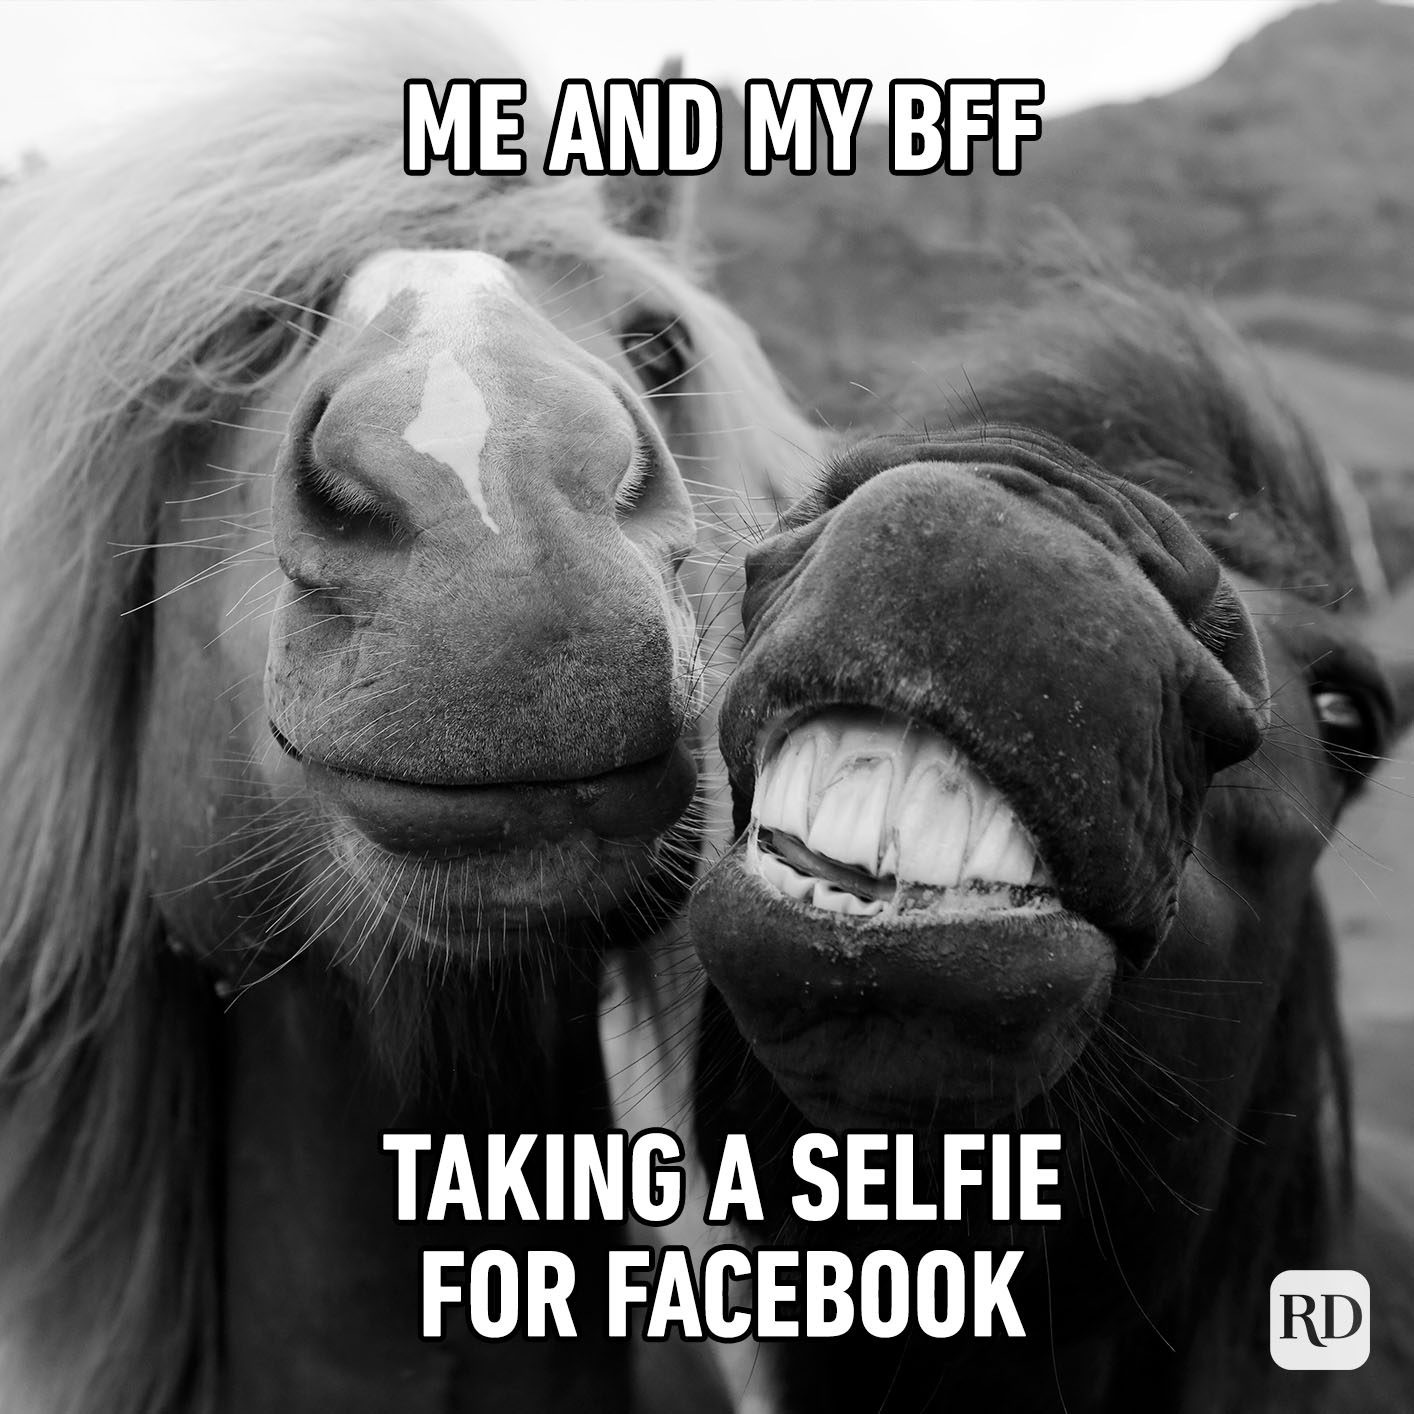 Me and my best friend taking a selfie for Facebook